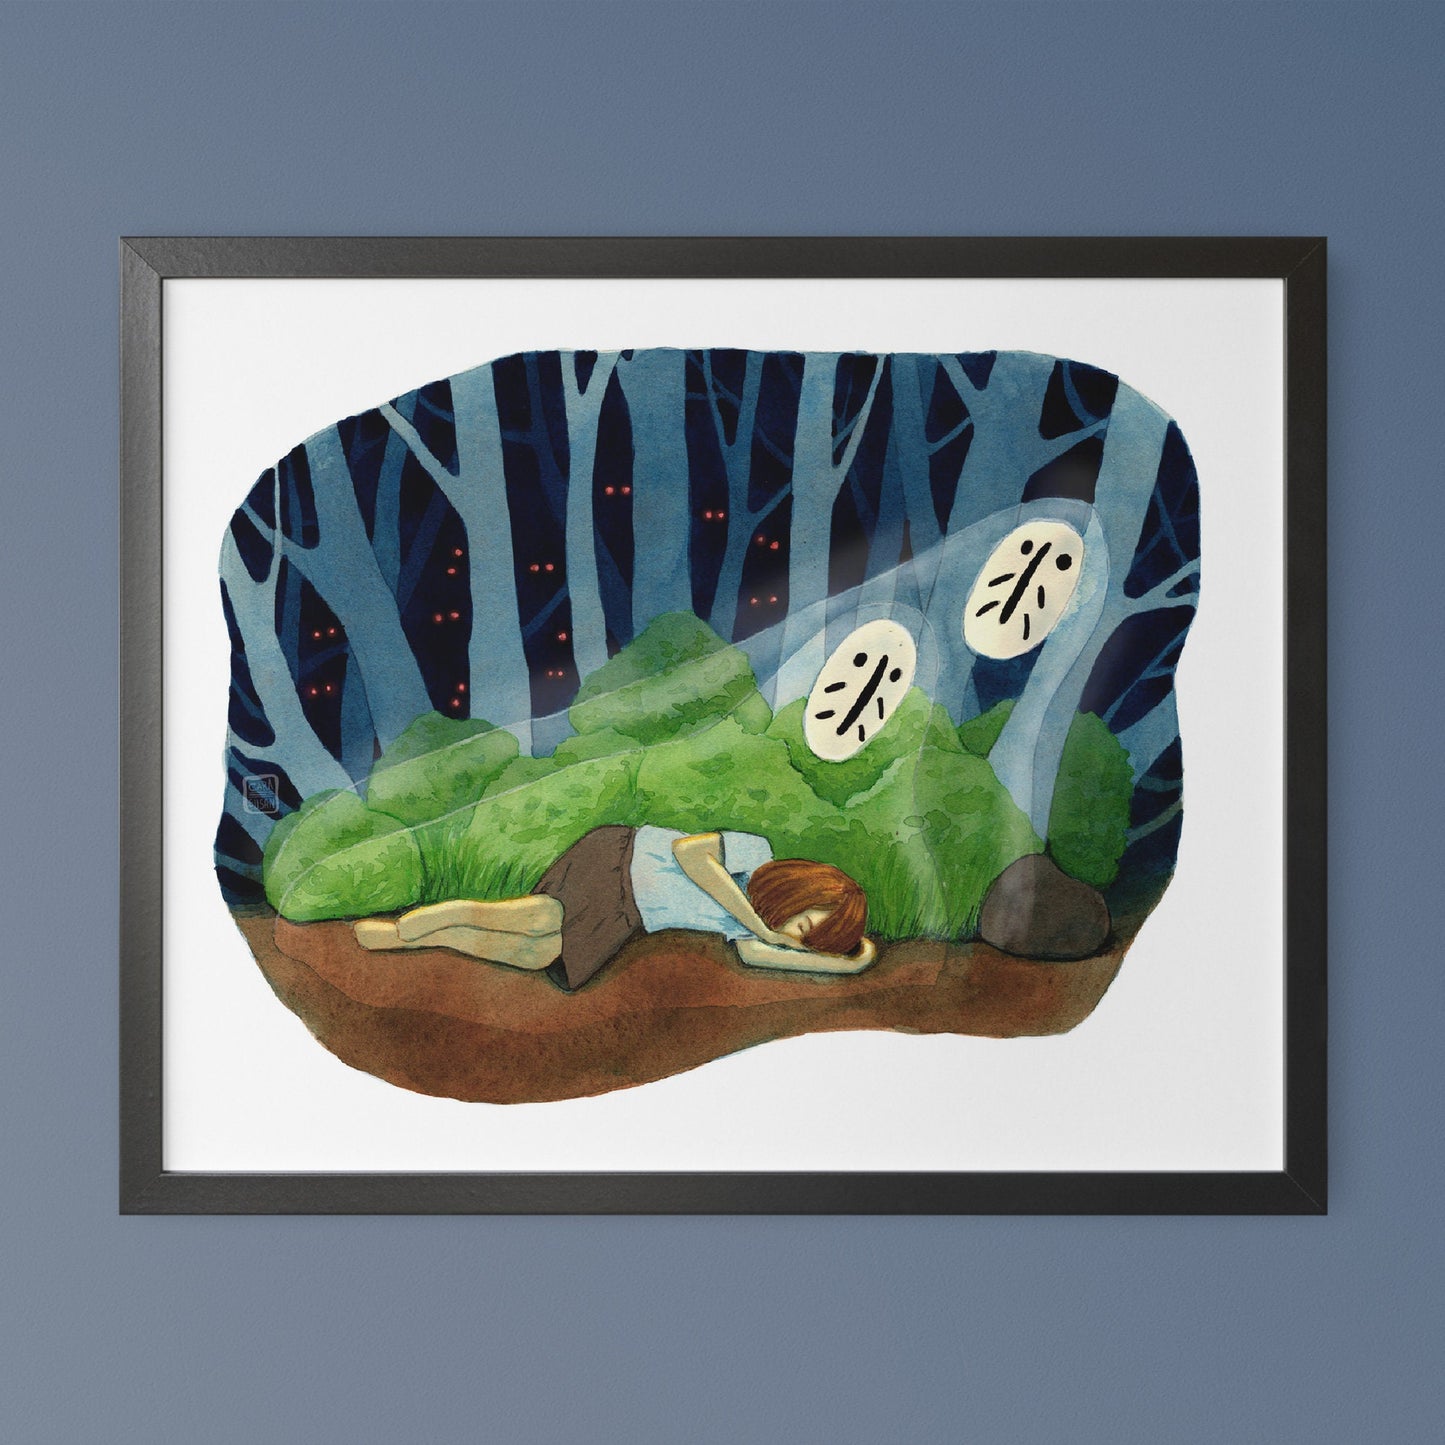 Art print 'Sleep Watcher' - 37x29cm - on fine watercolor paper - signed and limited